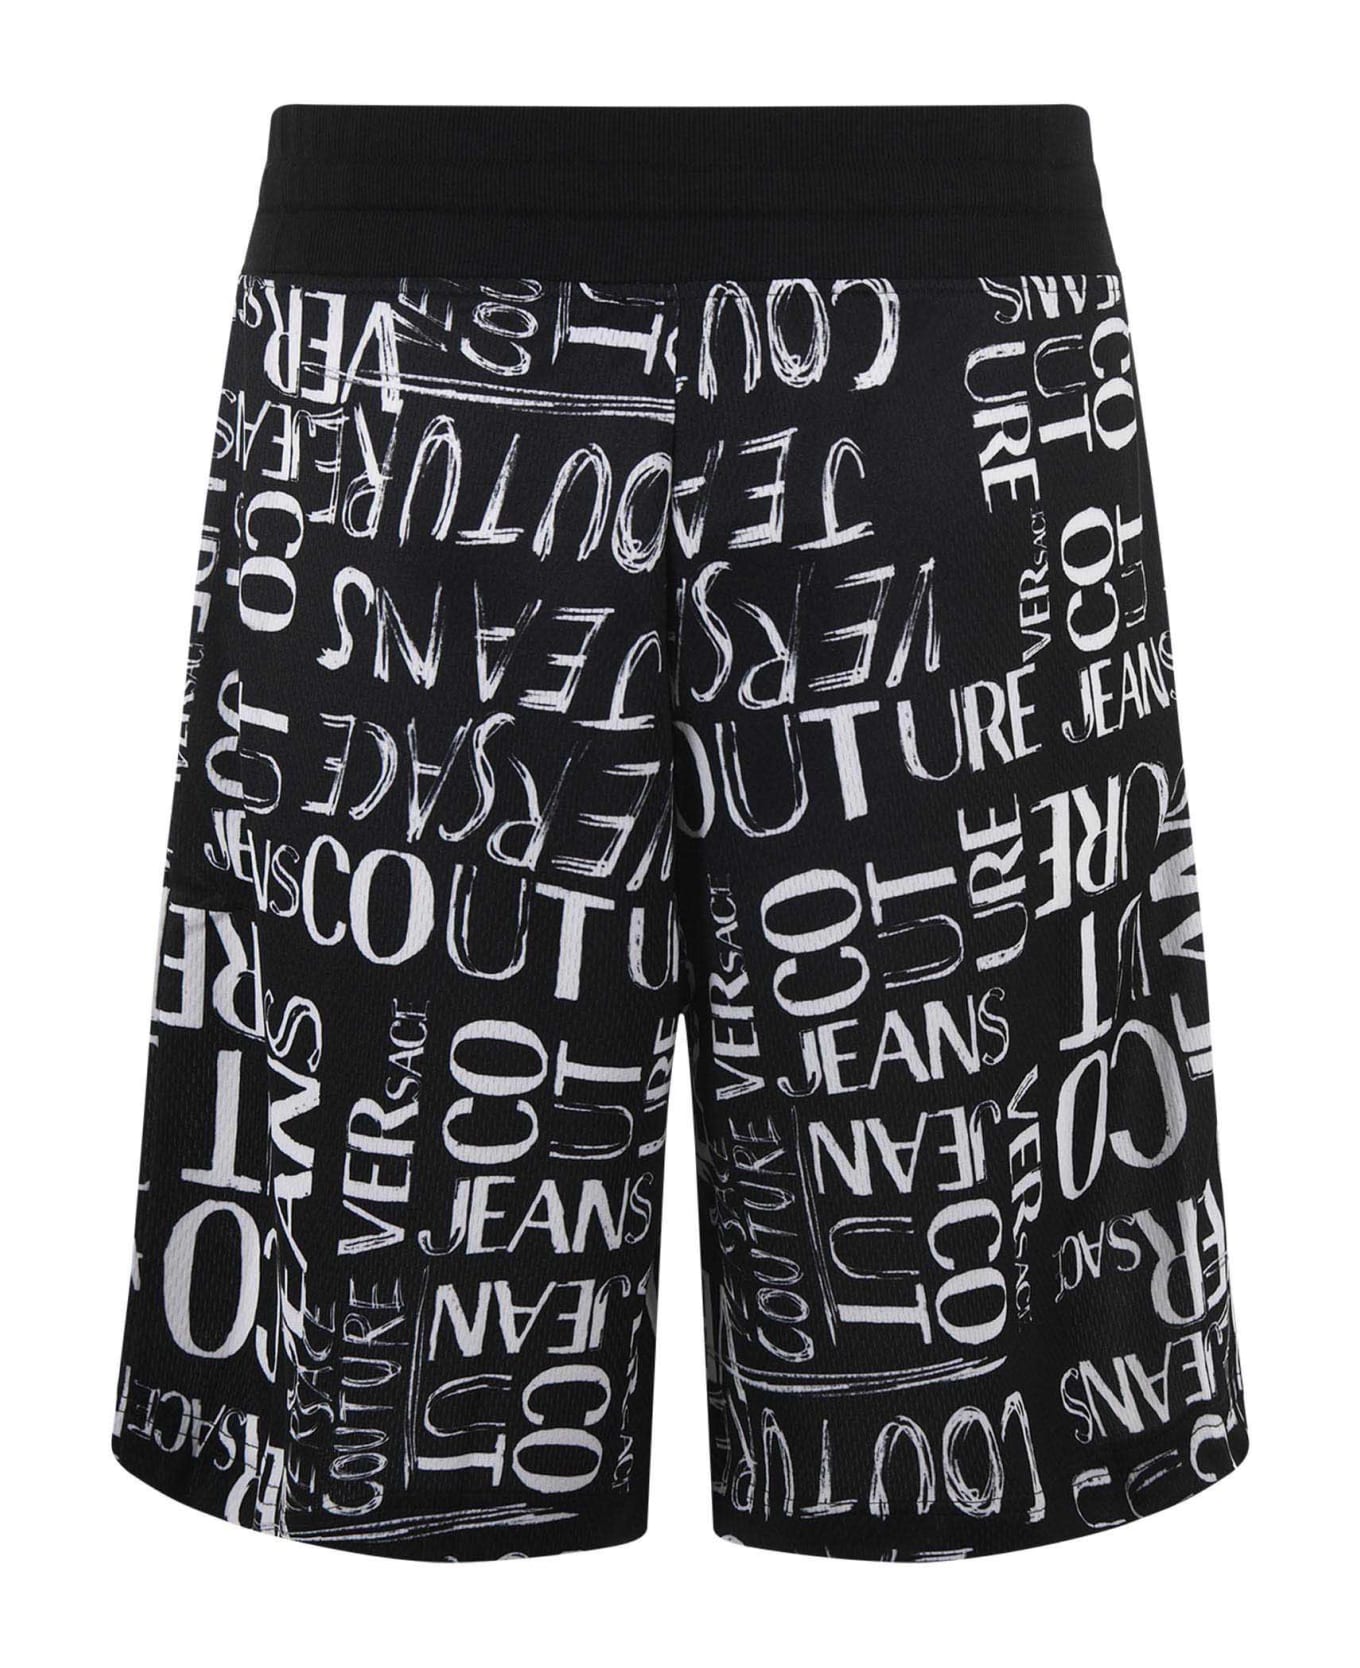 Versace Jeans Couture Shorts - Nero/bianco